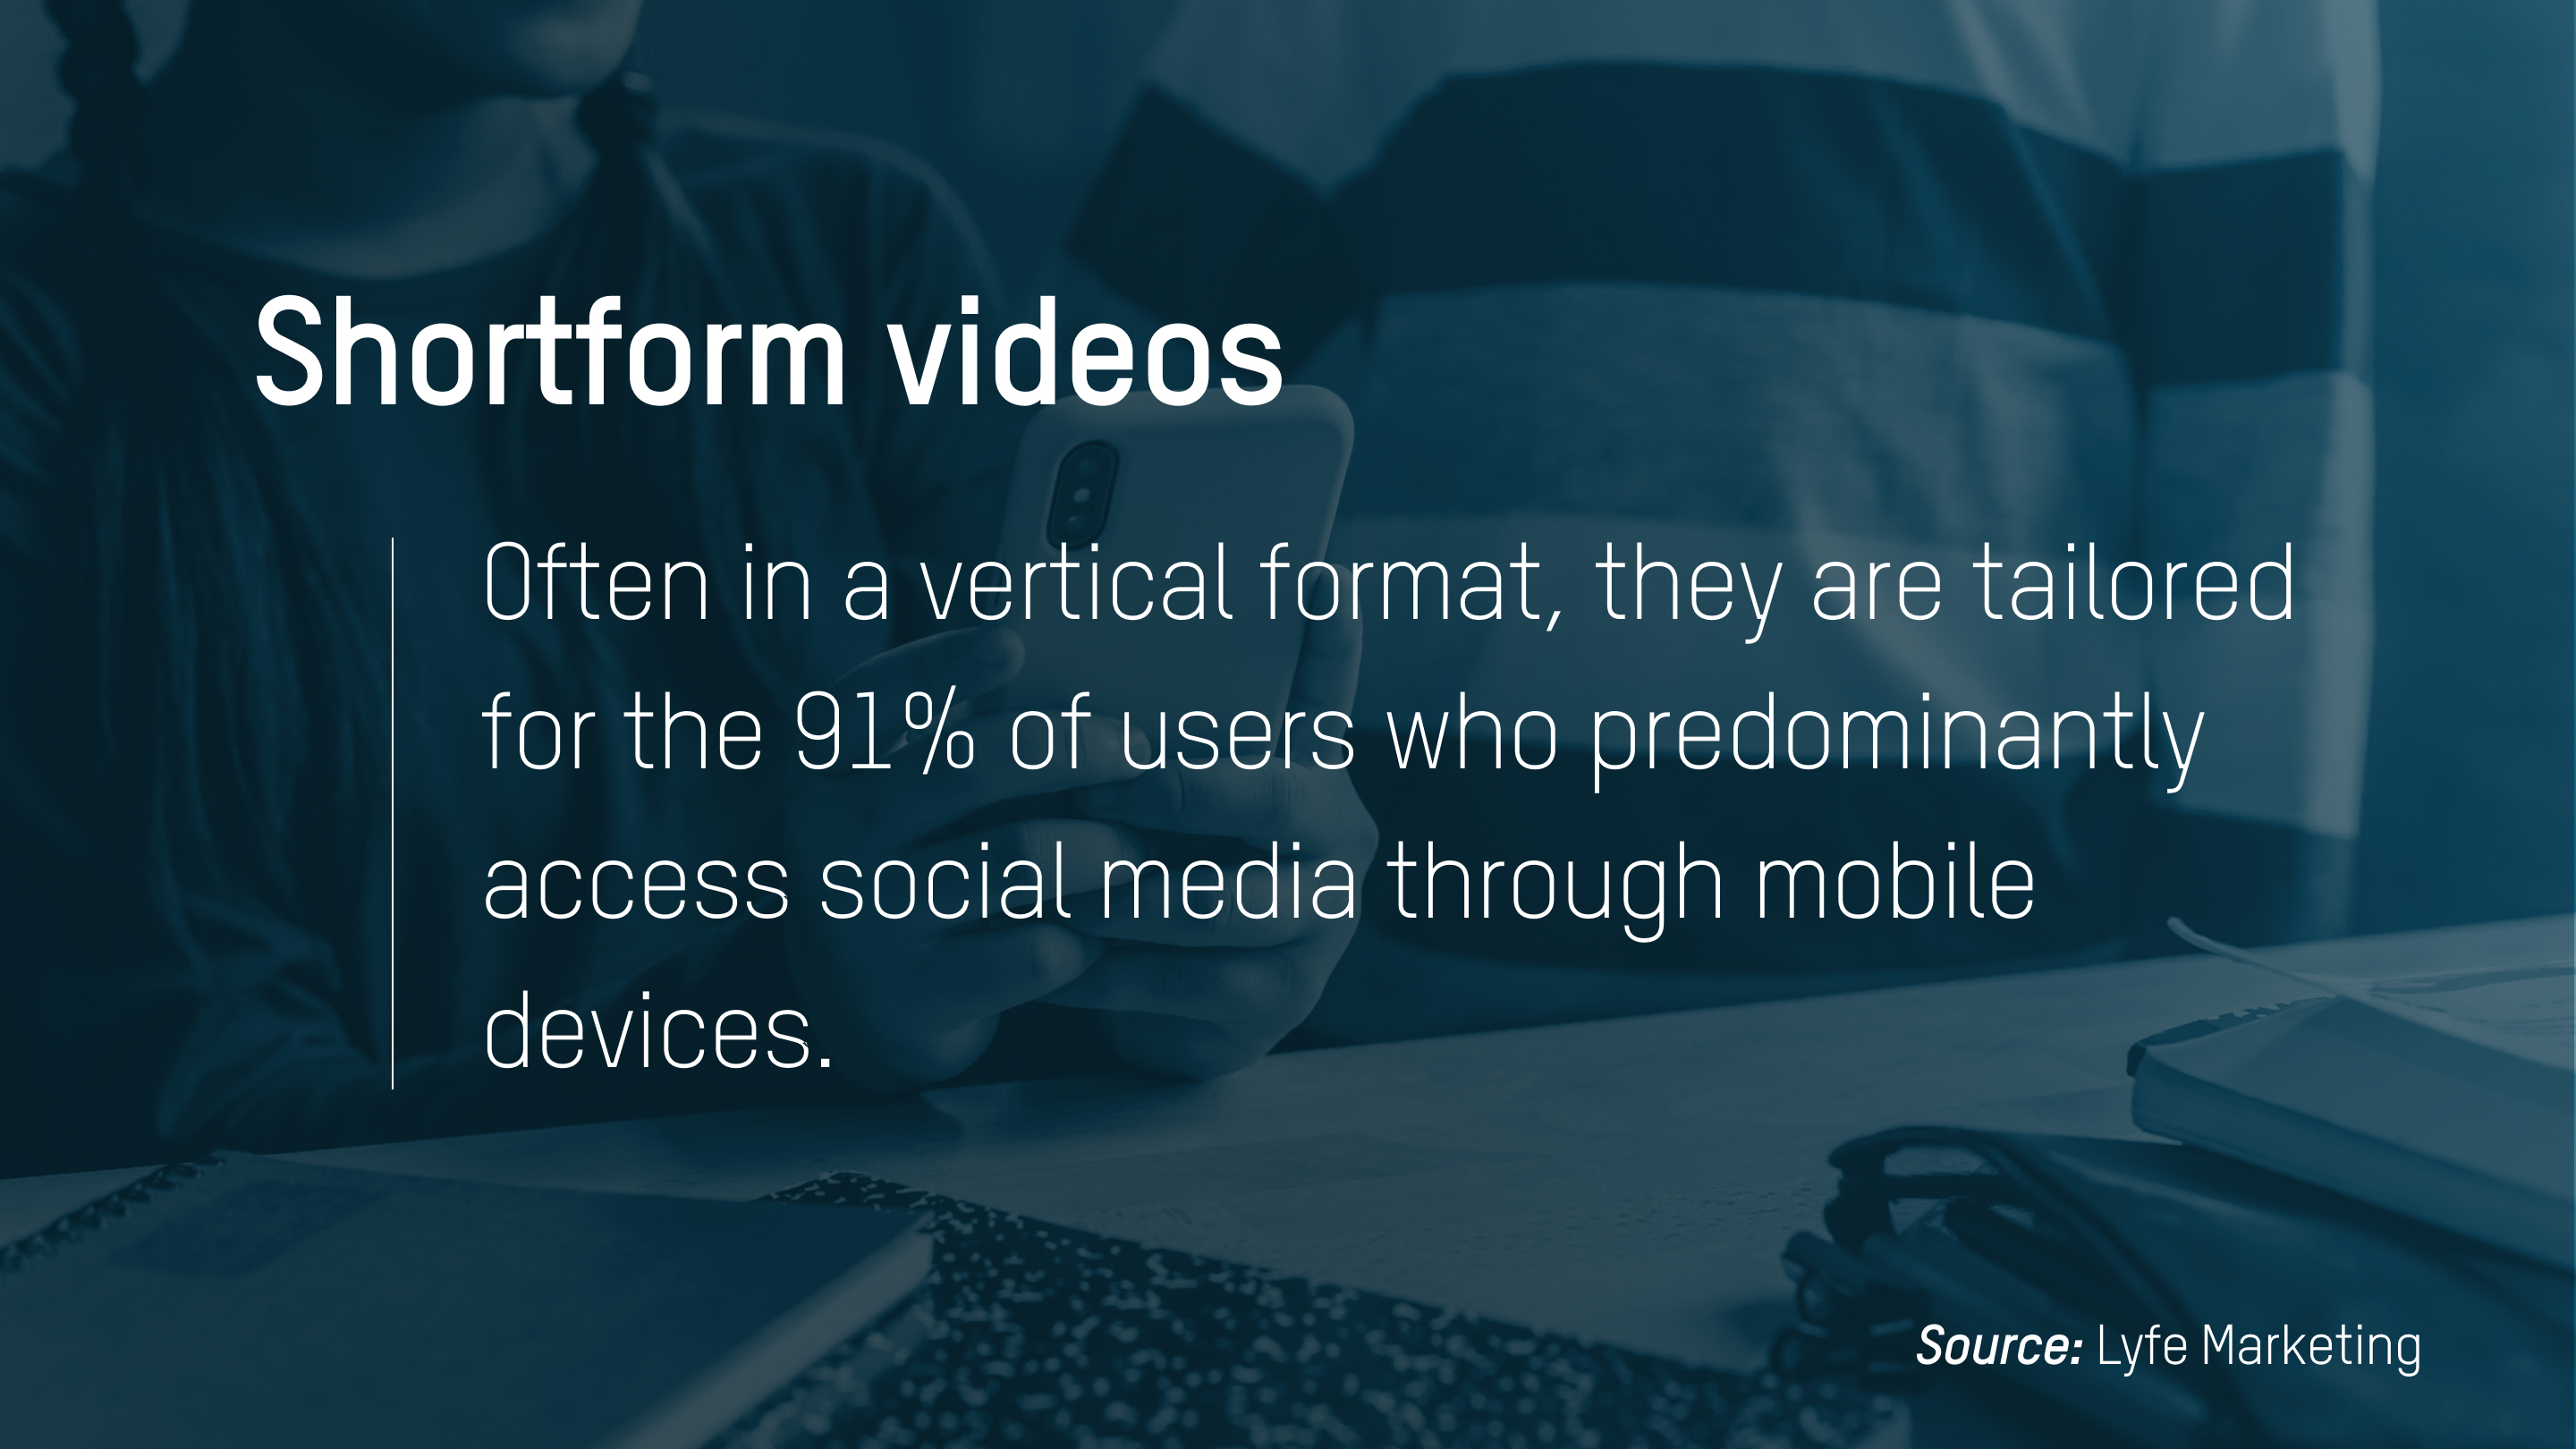 Short-form videos cater to 91% of online users